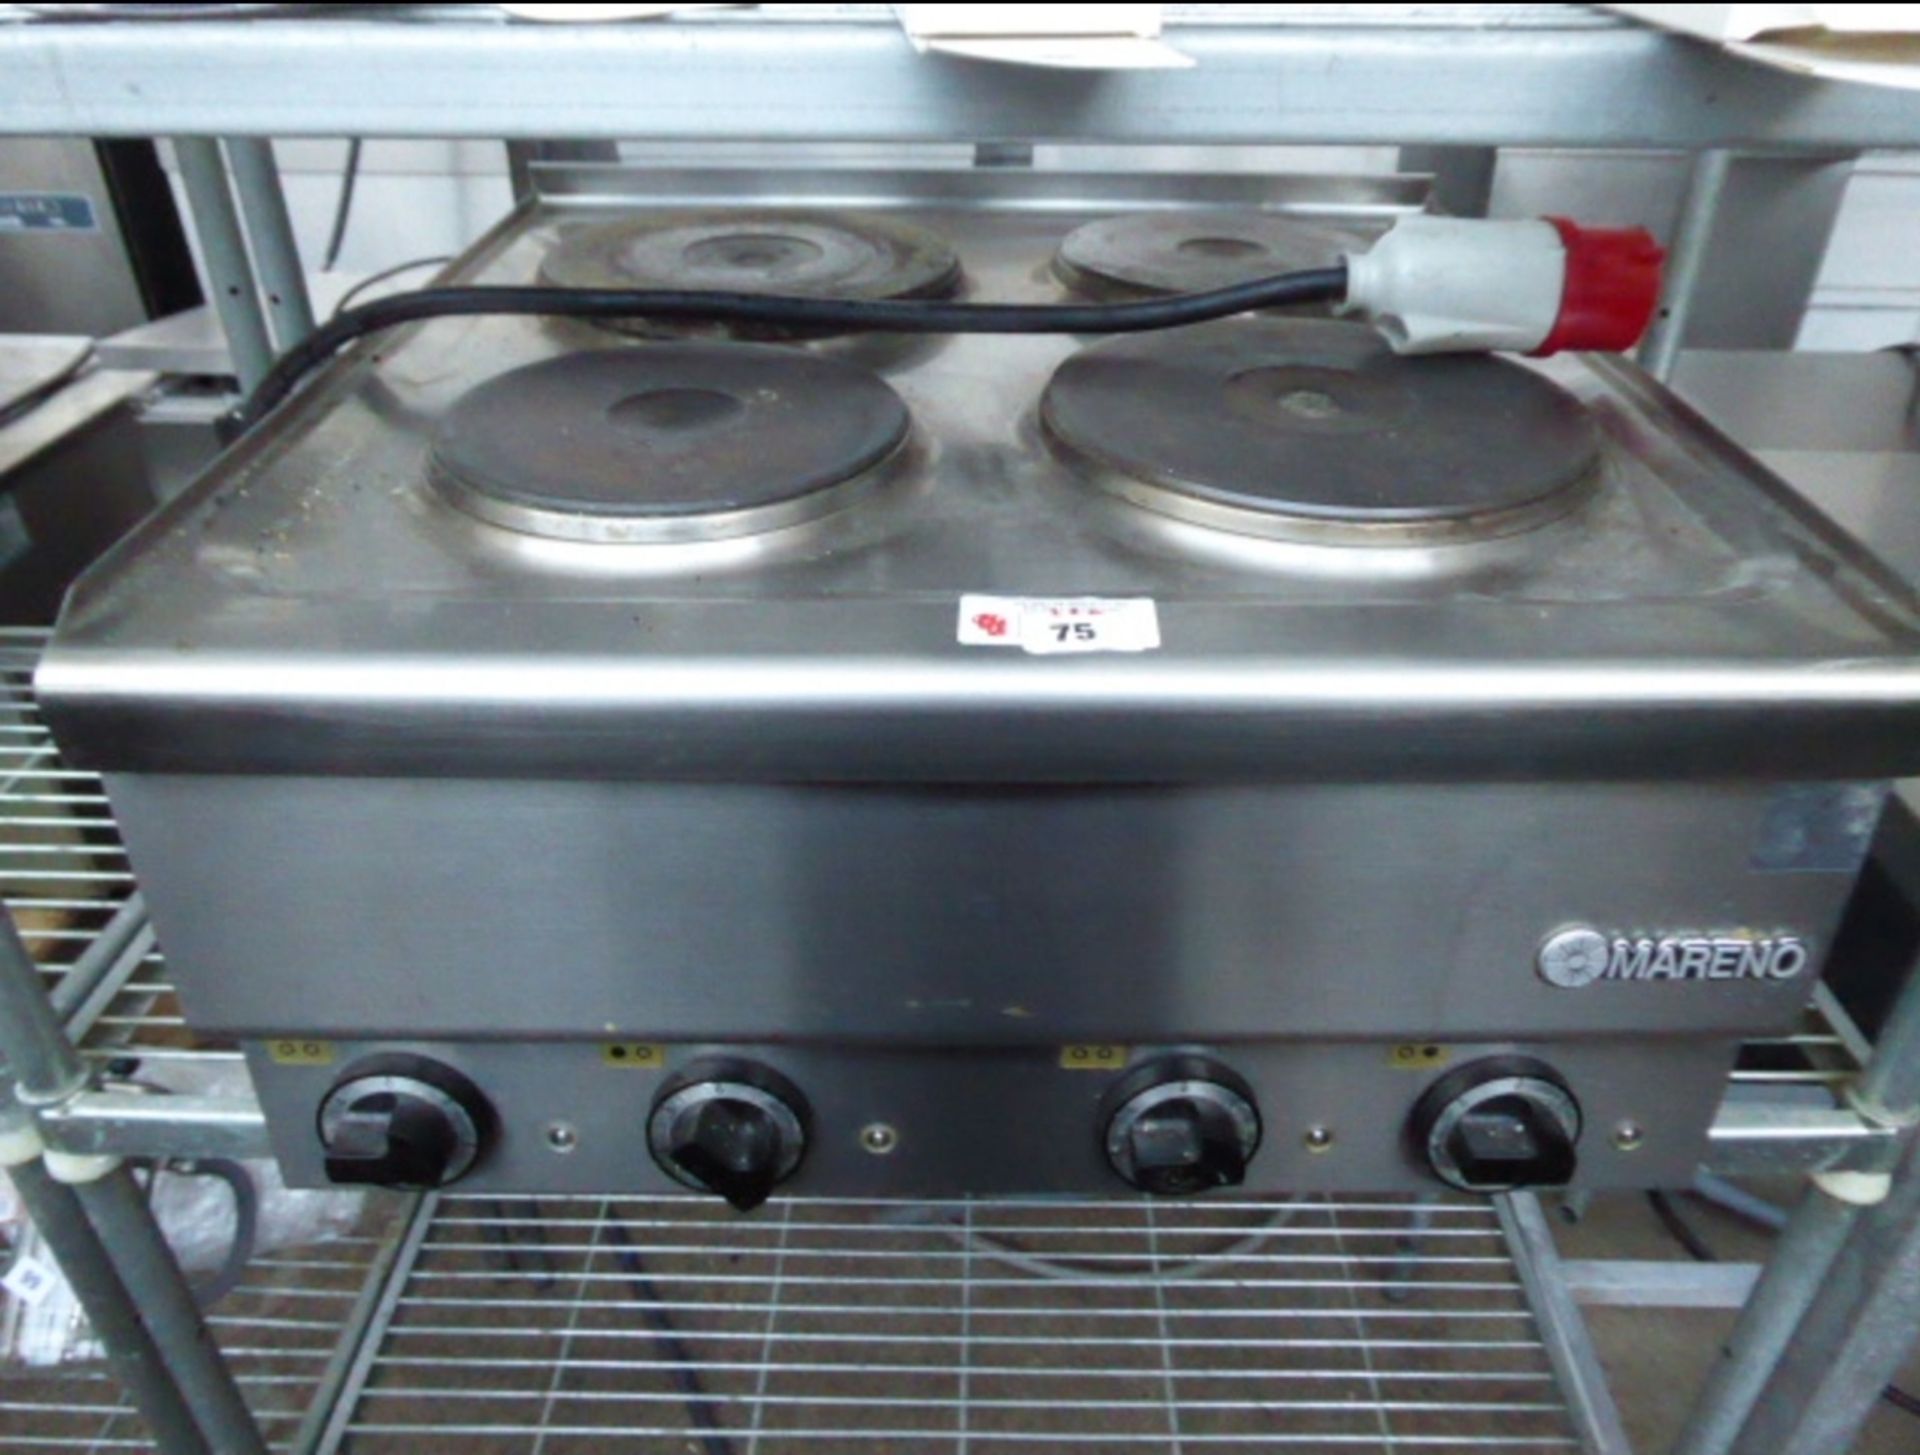 RESTAURANT 4 RING MARENO ELECTRIC 3 PHASE STOVE TOP NO RESERVE